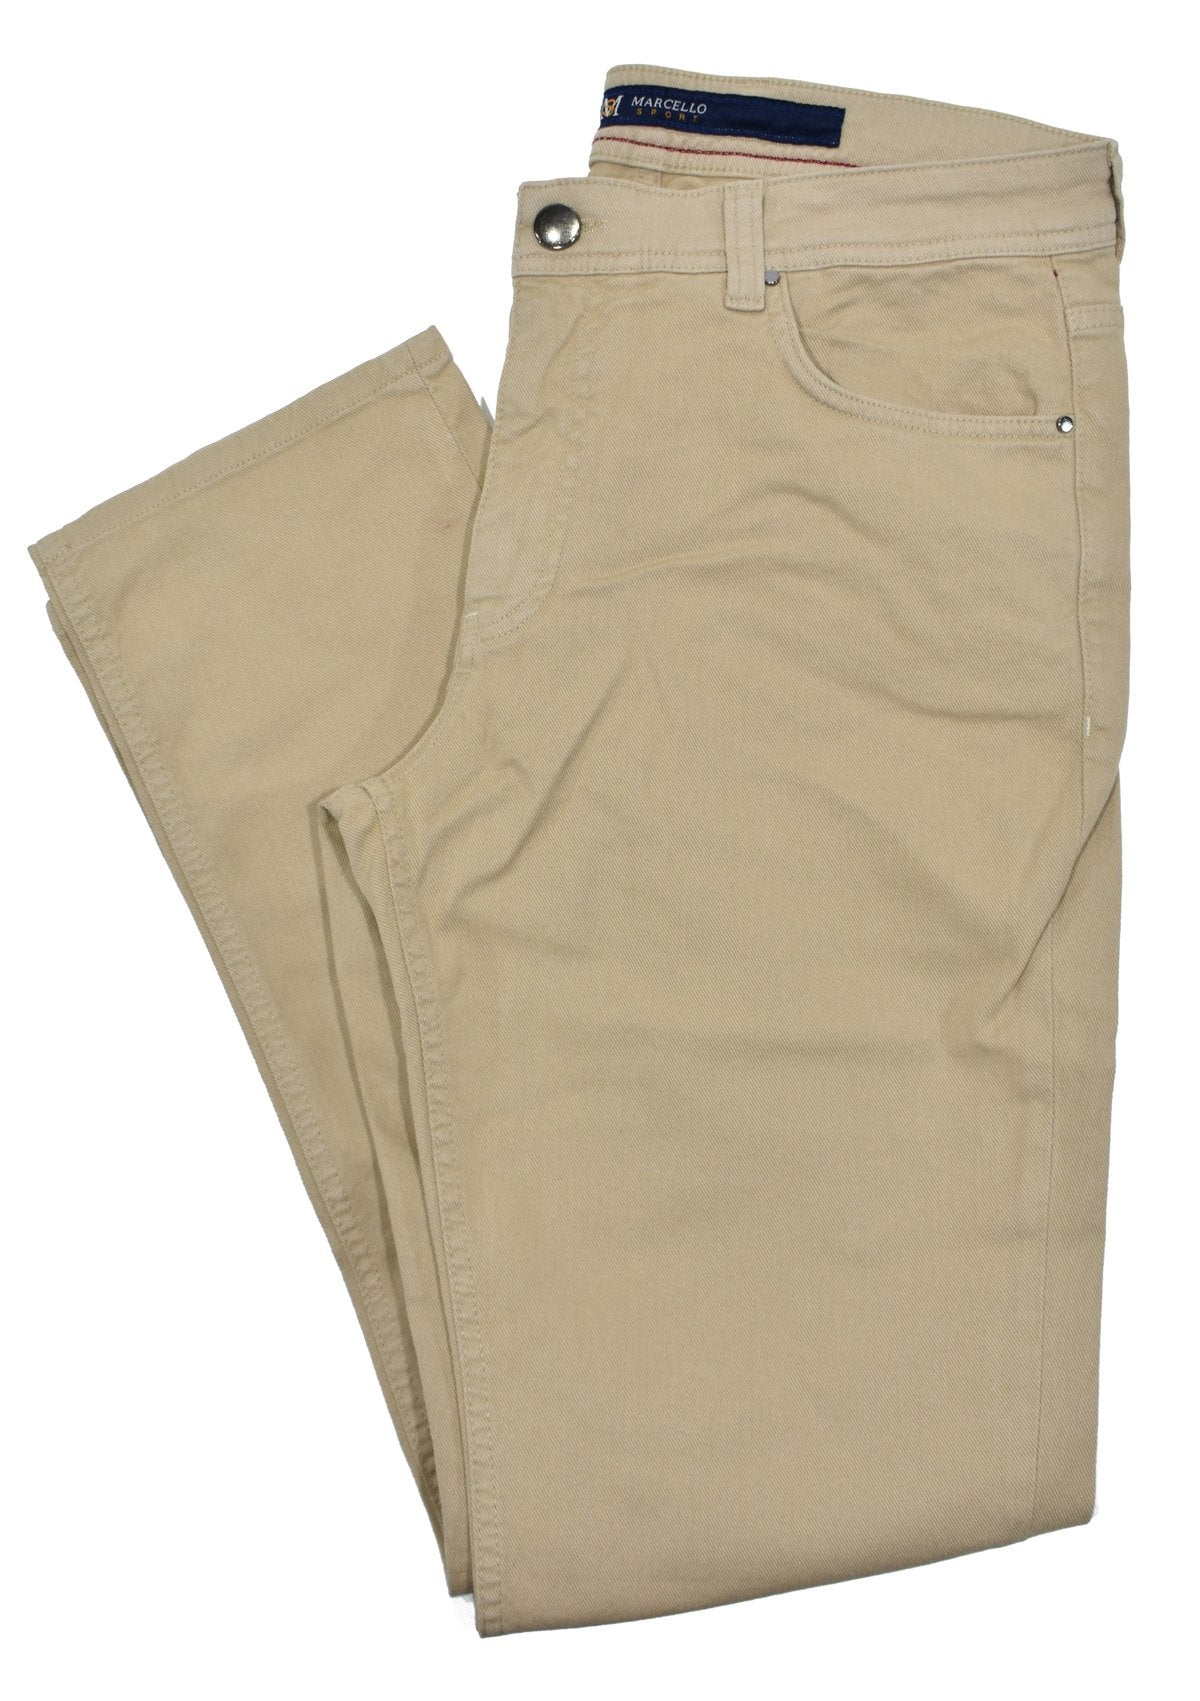 MYTHS Cargo pants contemporary fit in olive